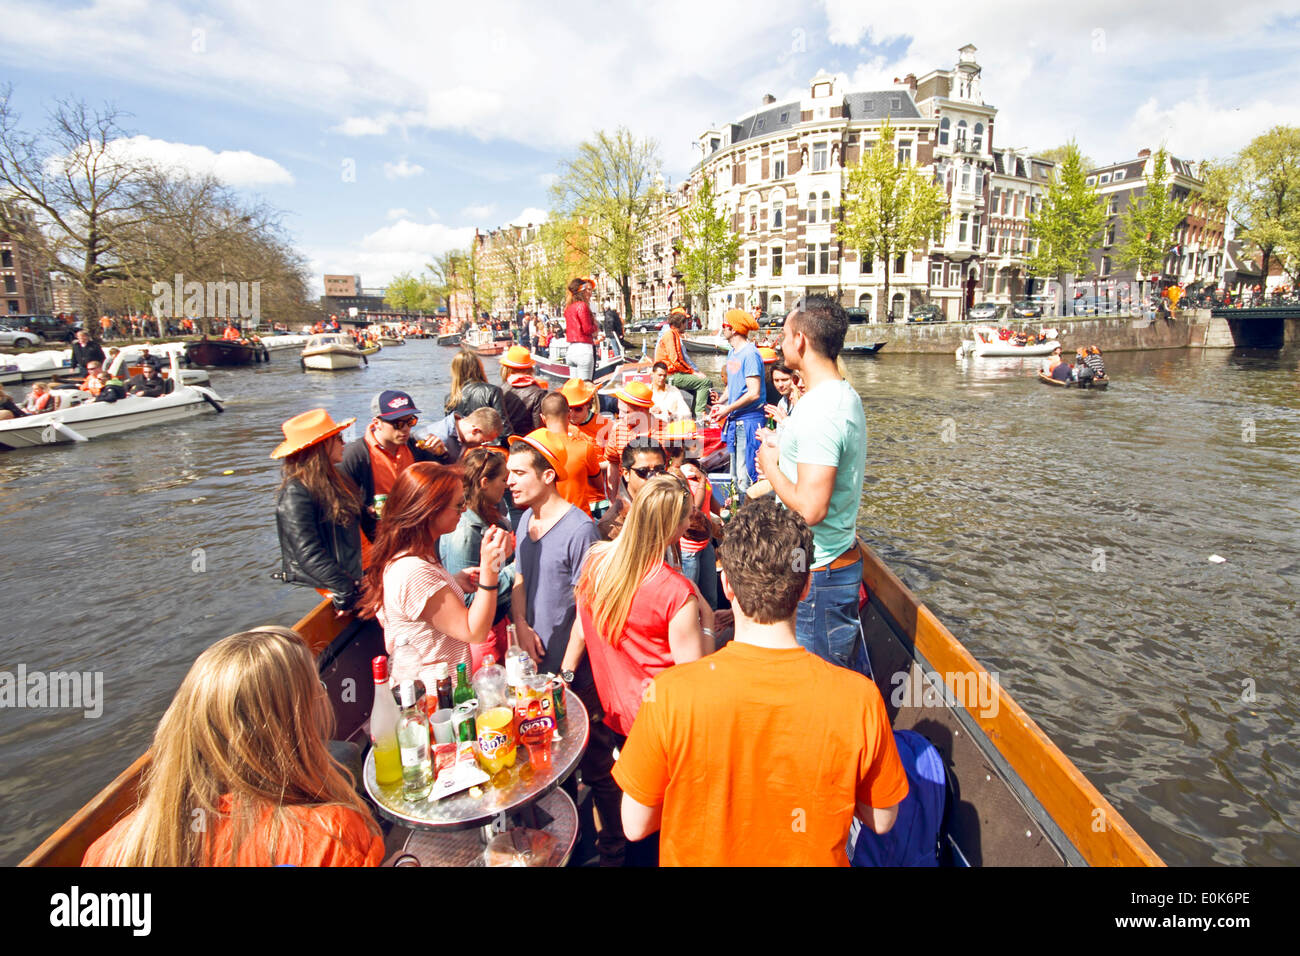 Canals full of boats and people in orange during the celebration of queensday on April 30, 2013 in Amsterdam Netherlands Stock Photo